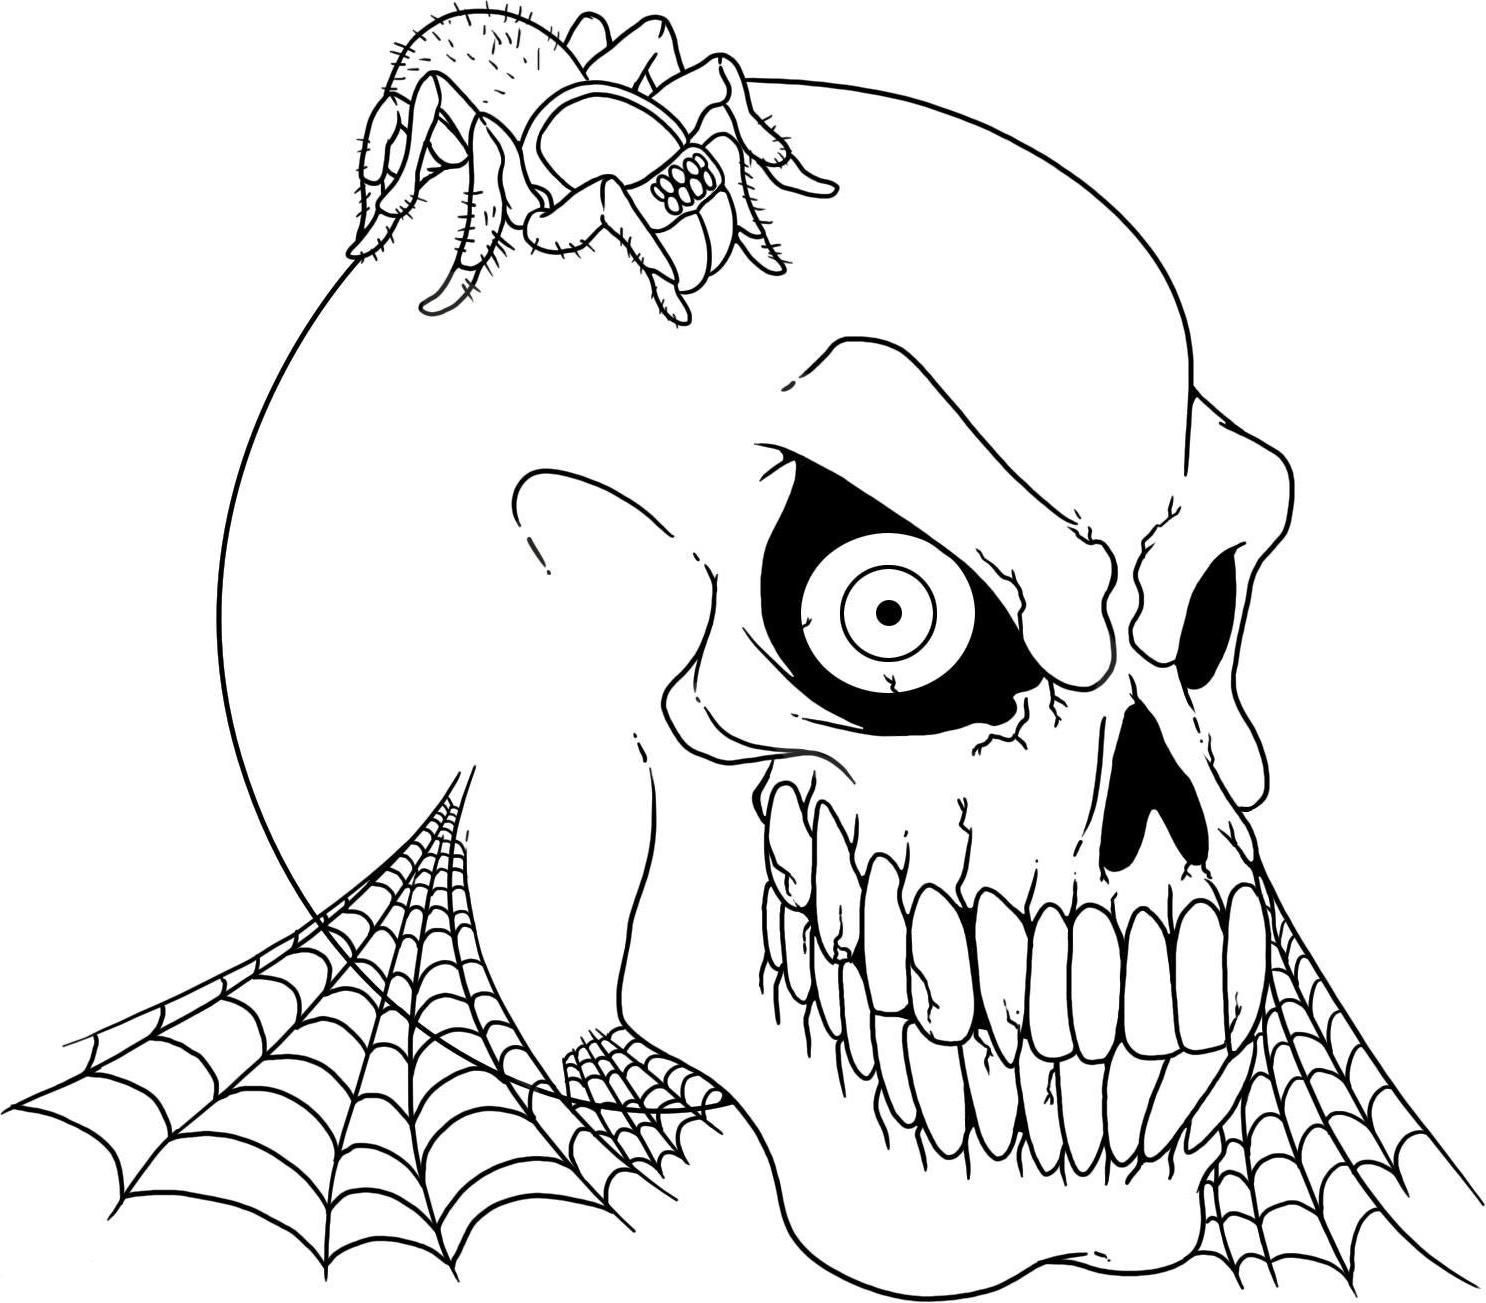 free-halloween-coloring-pages-free-printable-scary-download-free-halloween-coloring-pages-free